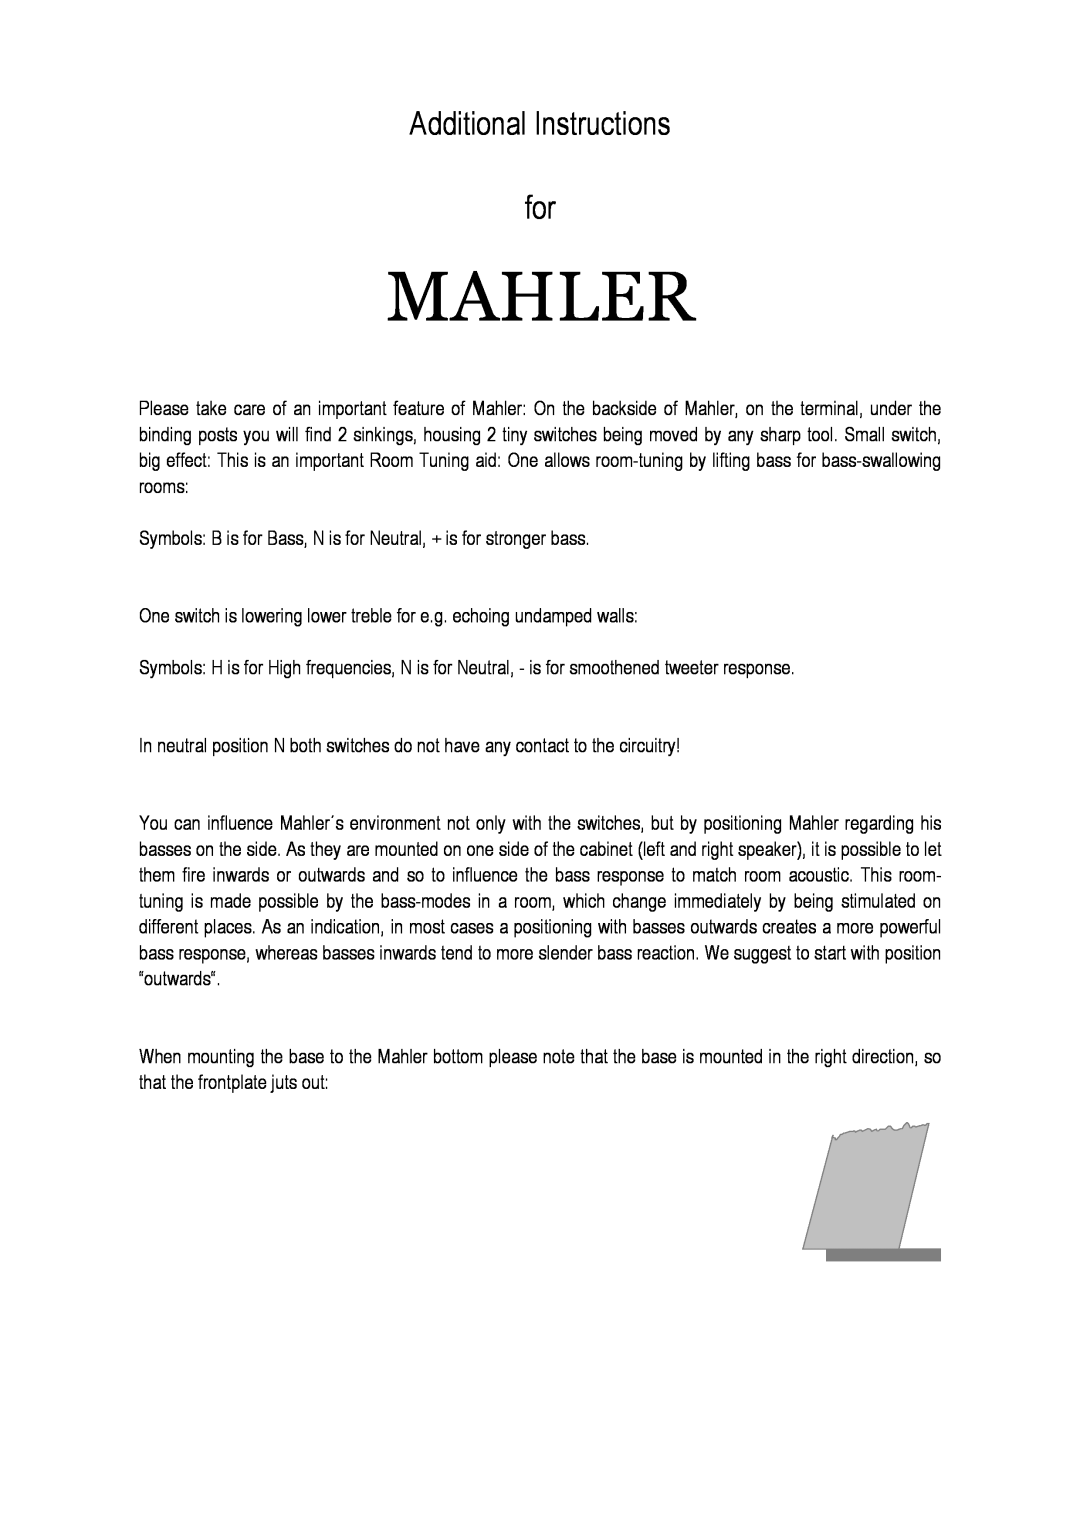 Vienna Acoustics Mahler manual Additional Instructions for 